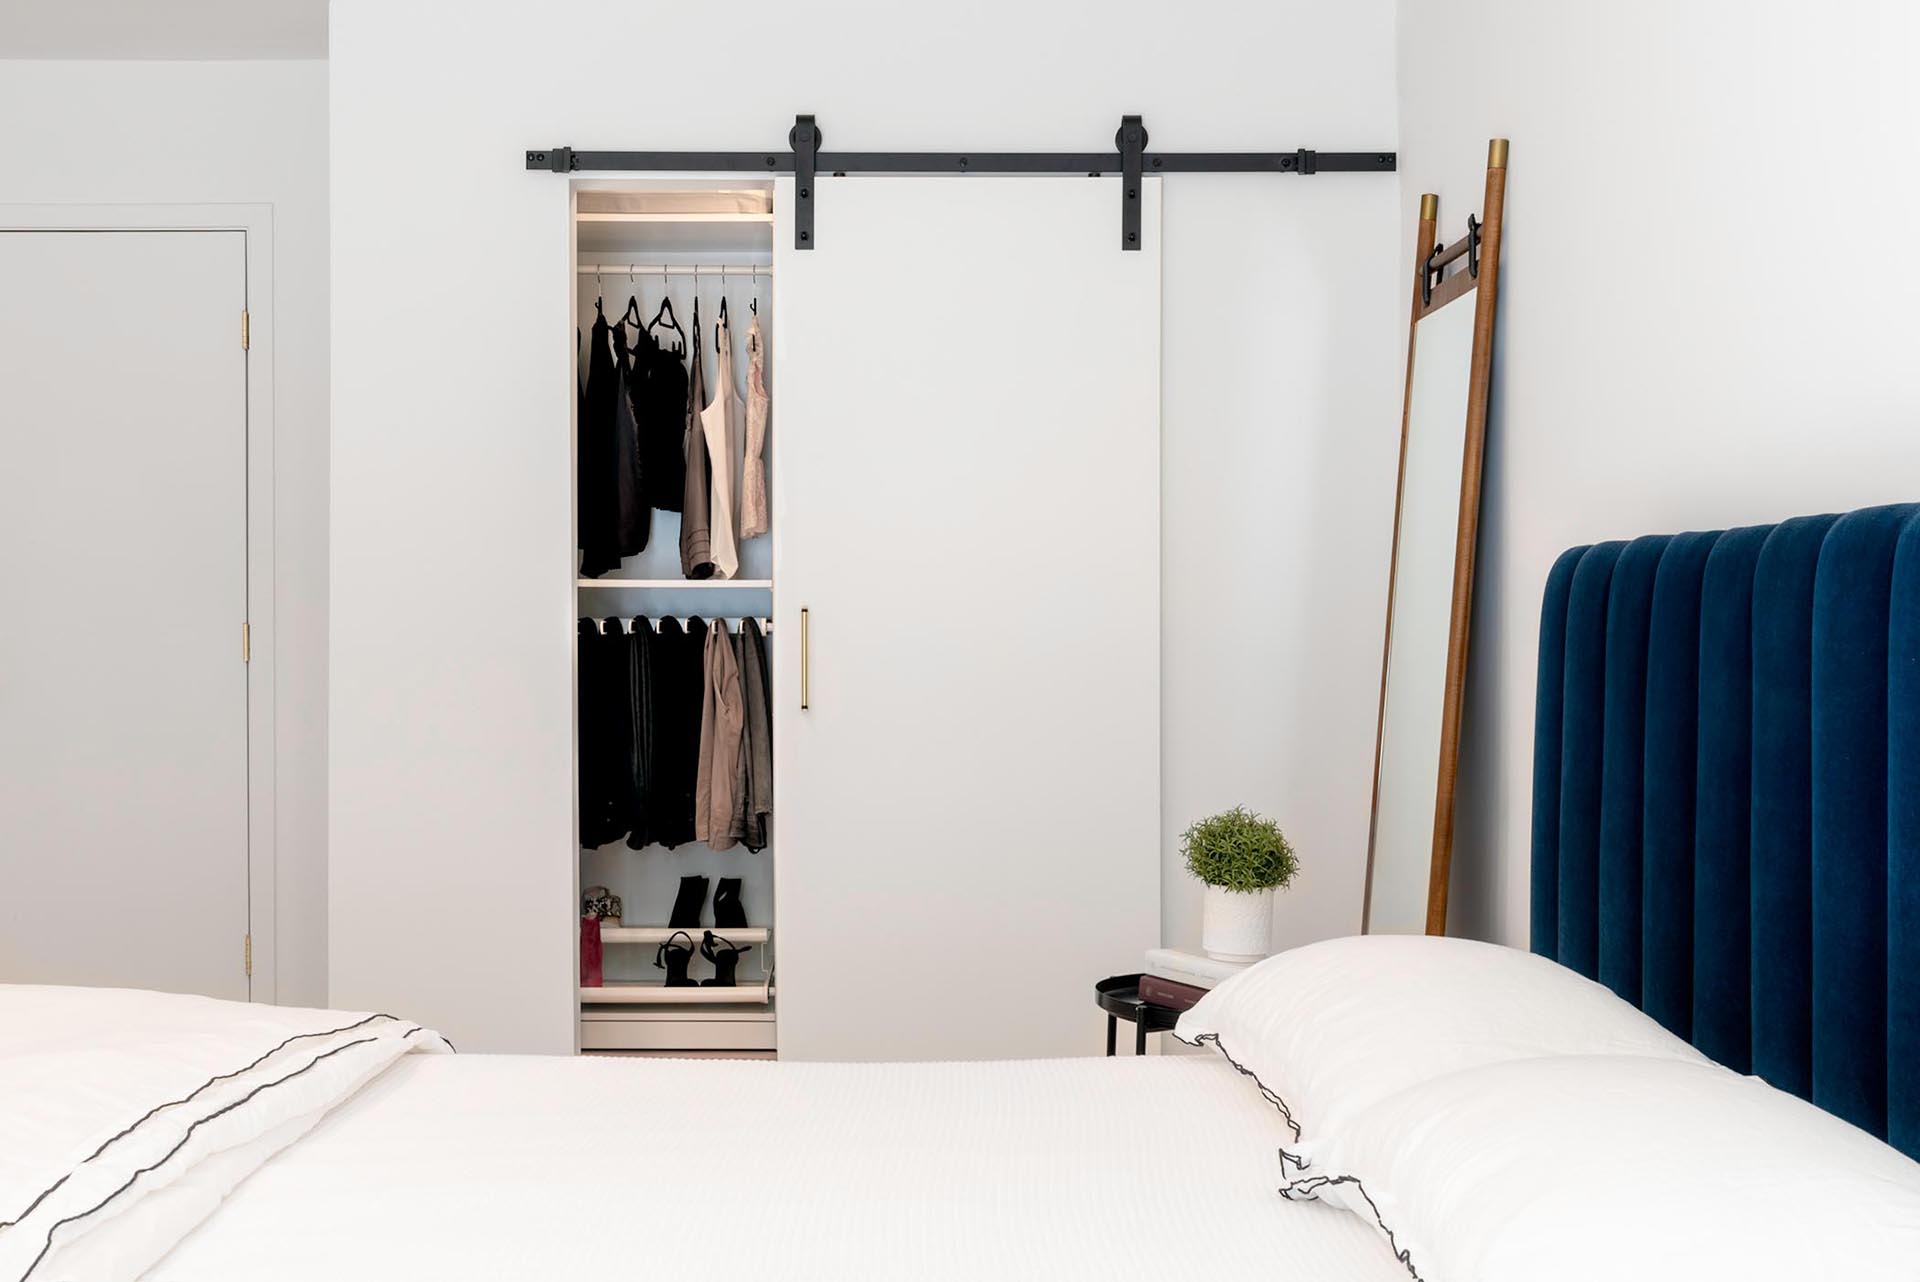 In this modern bedroom, there's a sliding barn door on the closet that includes matte black hardware. Color has been added to the interior with the use of a deep, royal blue velvet headboard and bed frame.